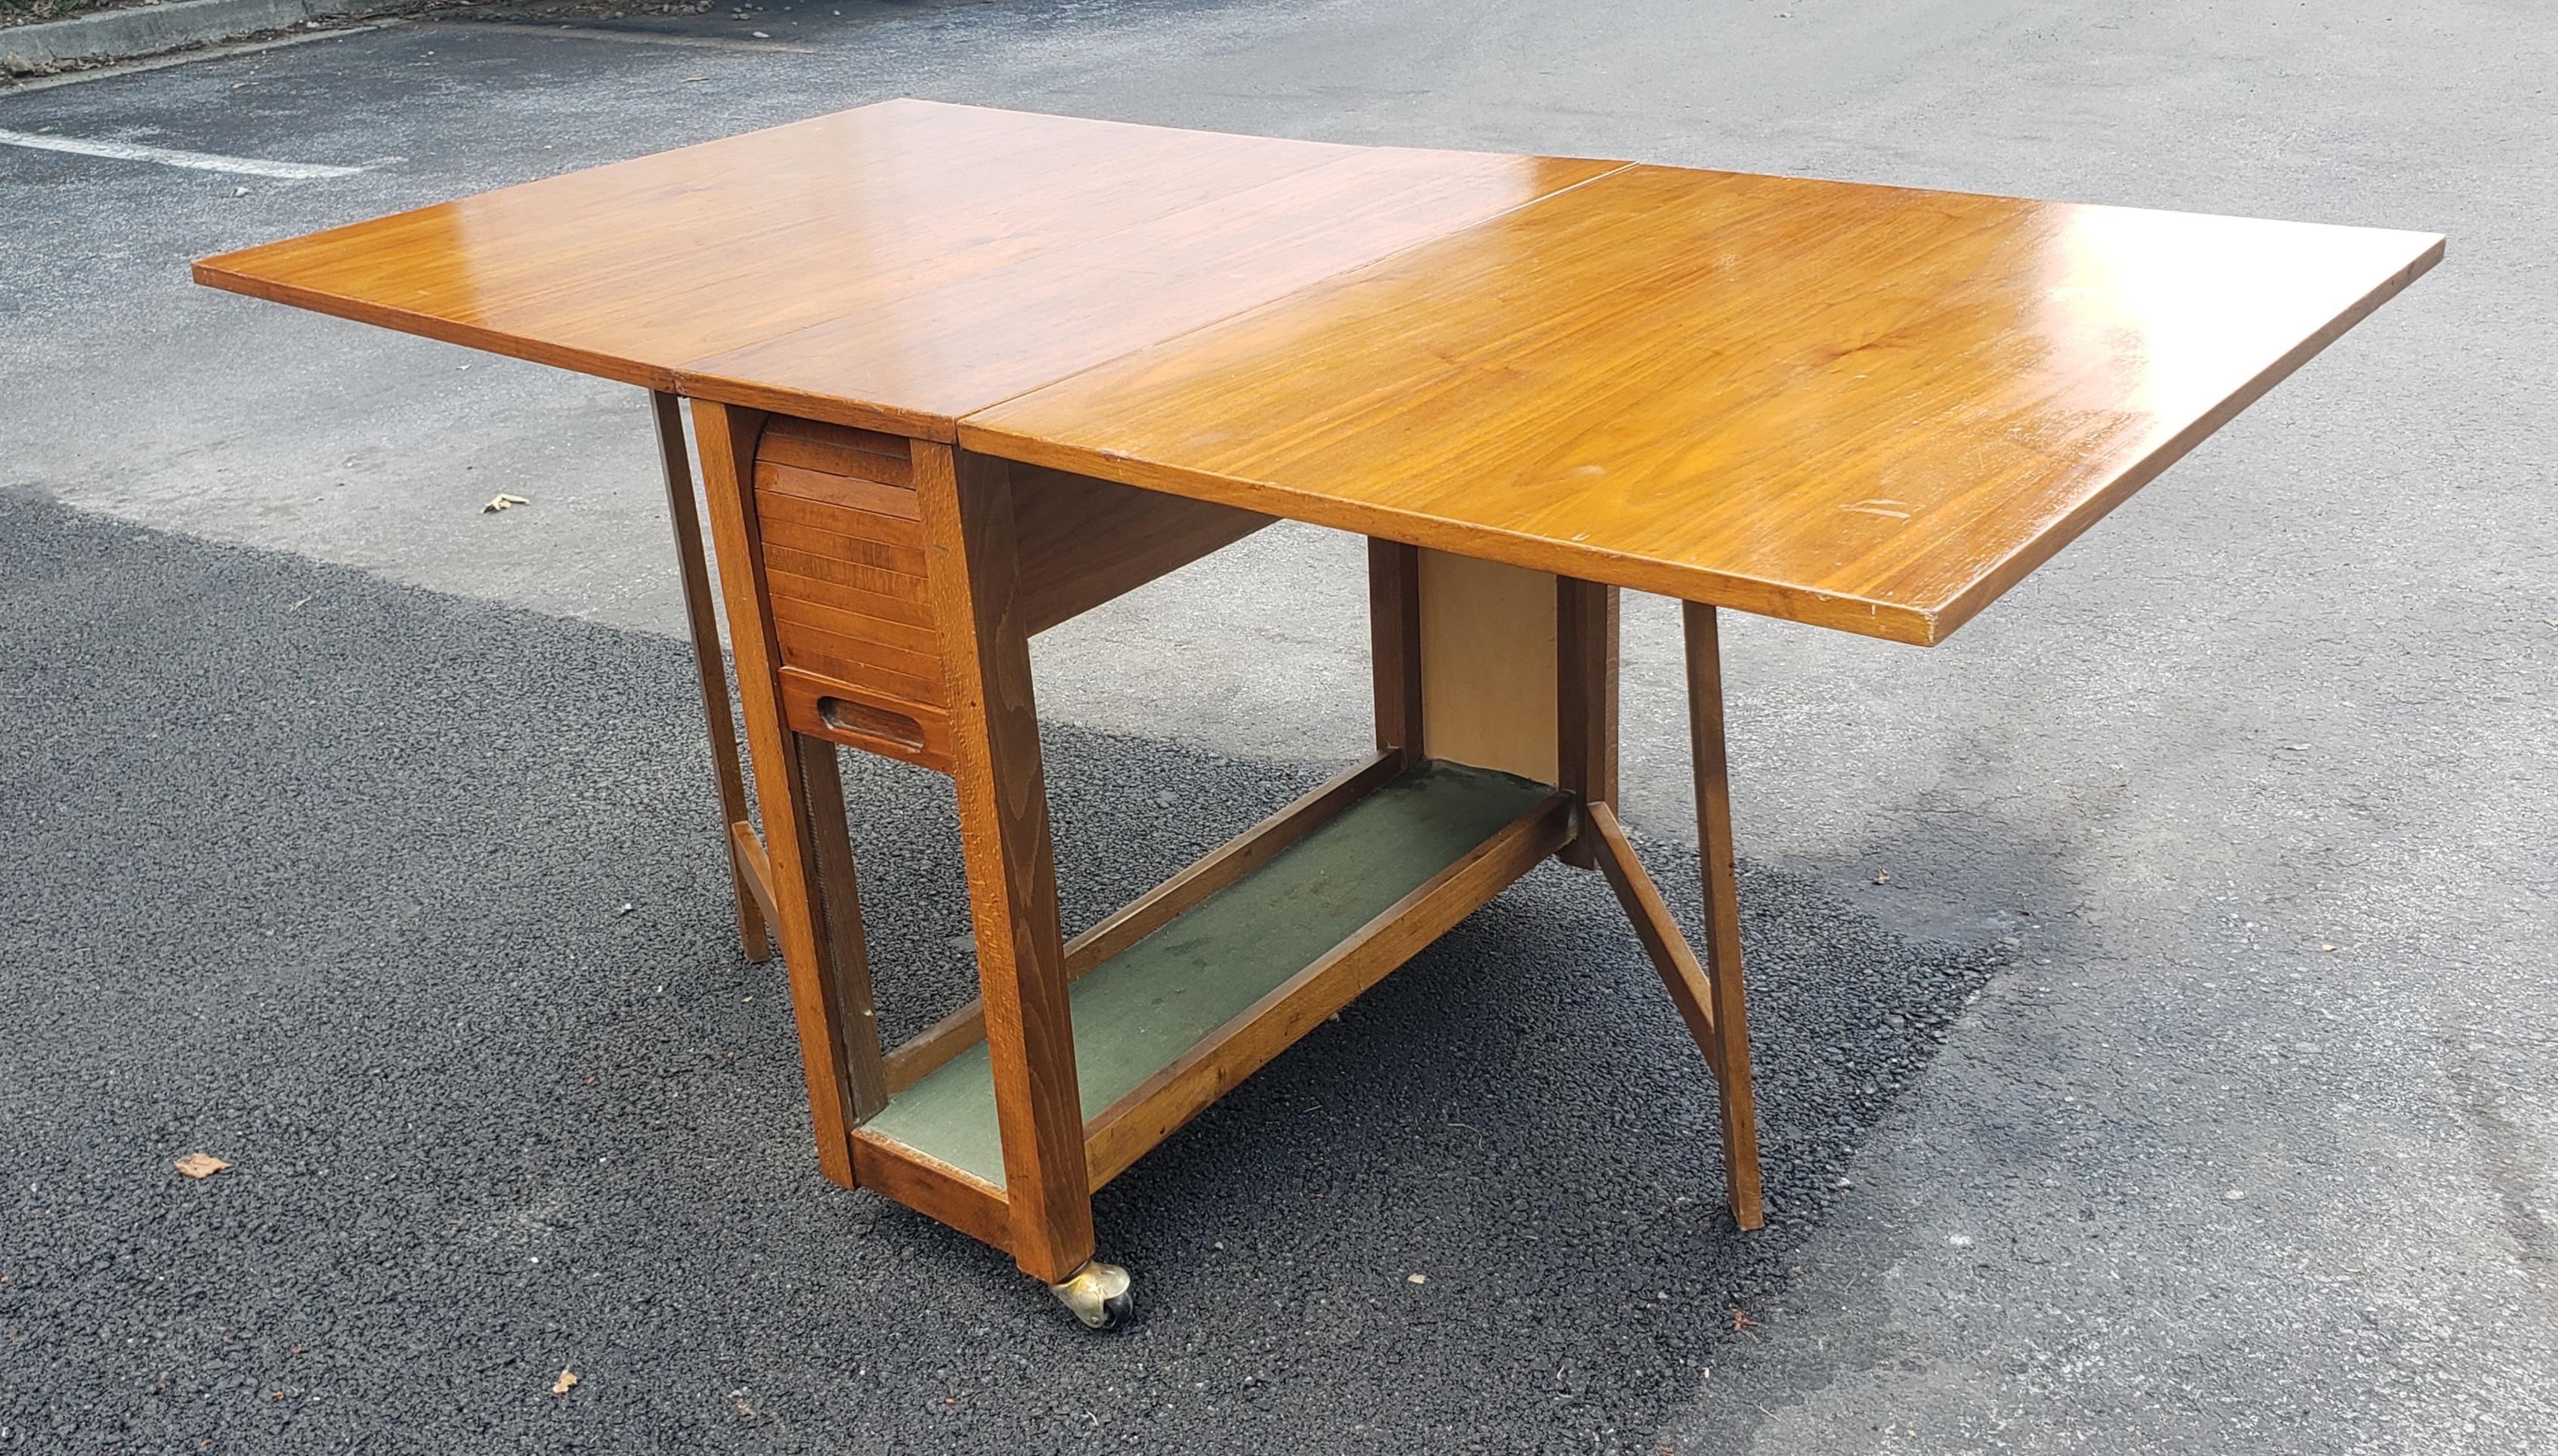 20th Century Mid-Century Danish Modern Teak Drop-Leaf Dining Table with Storage on Rollers For Sale